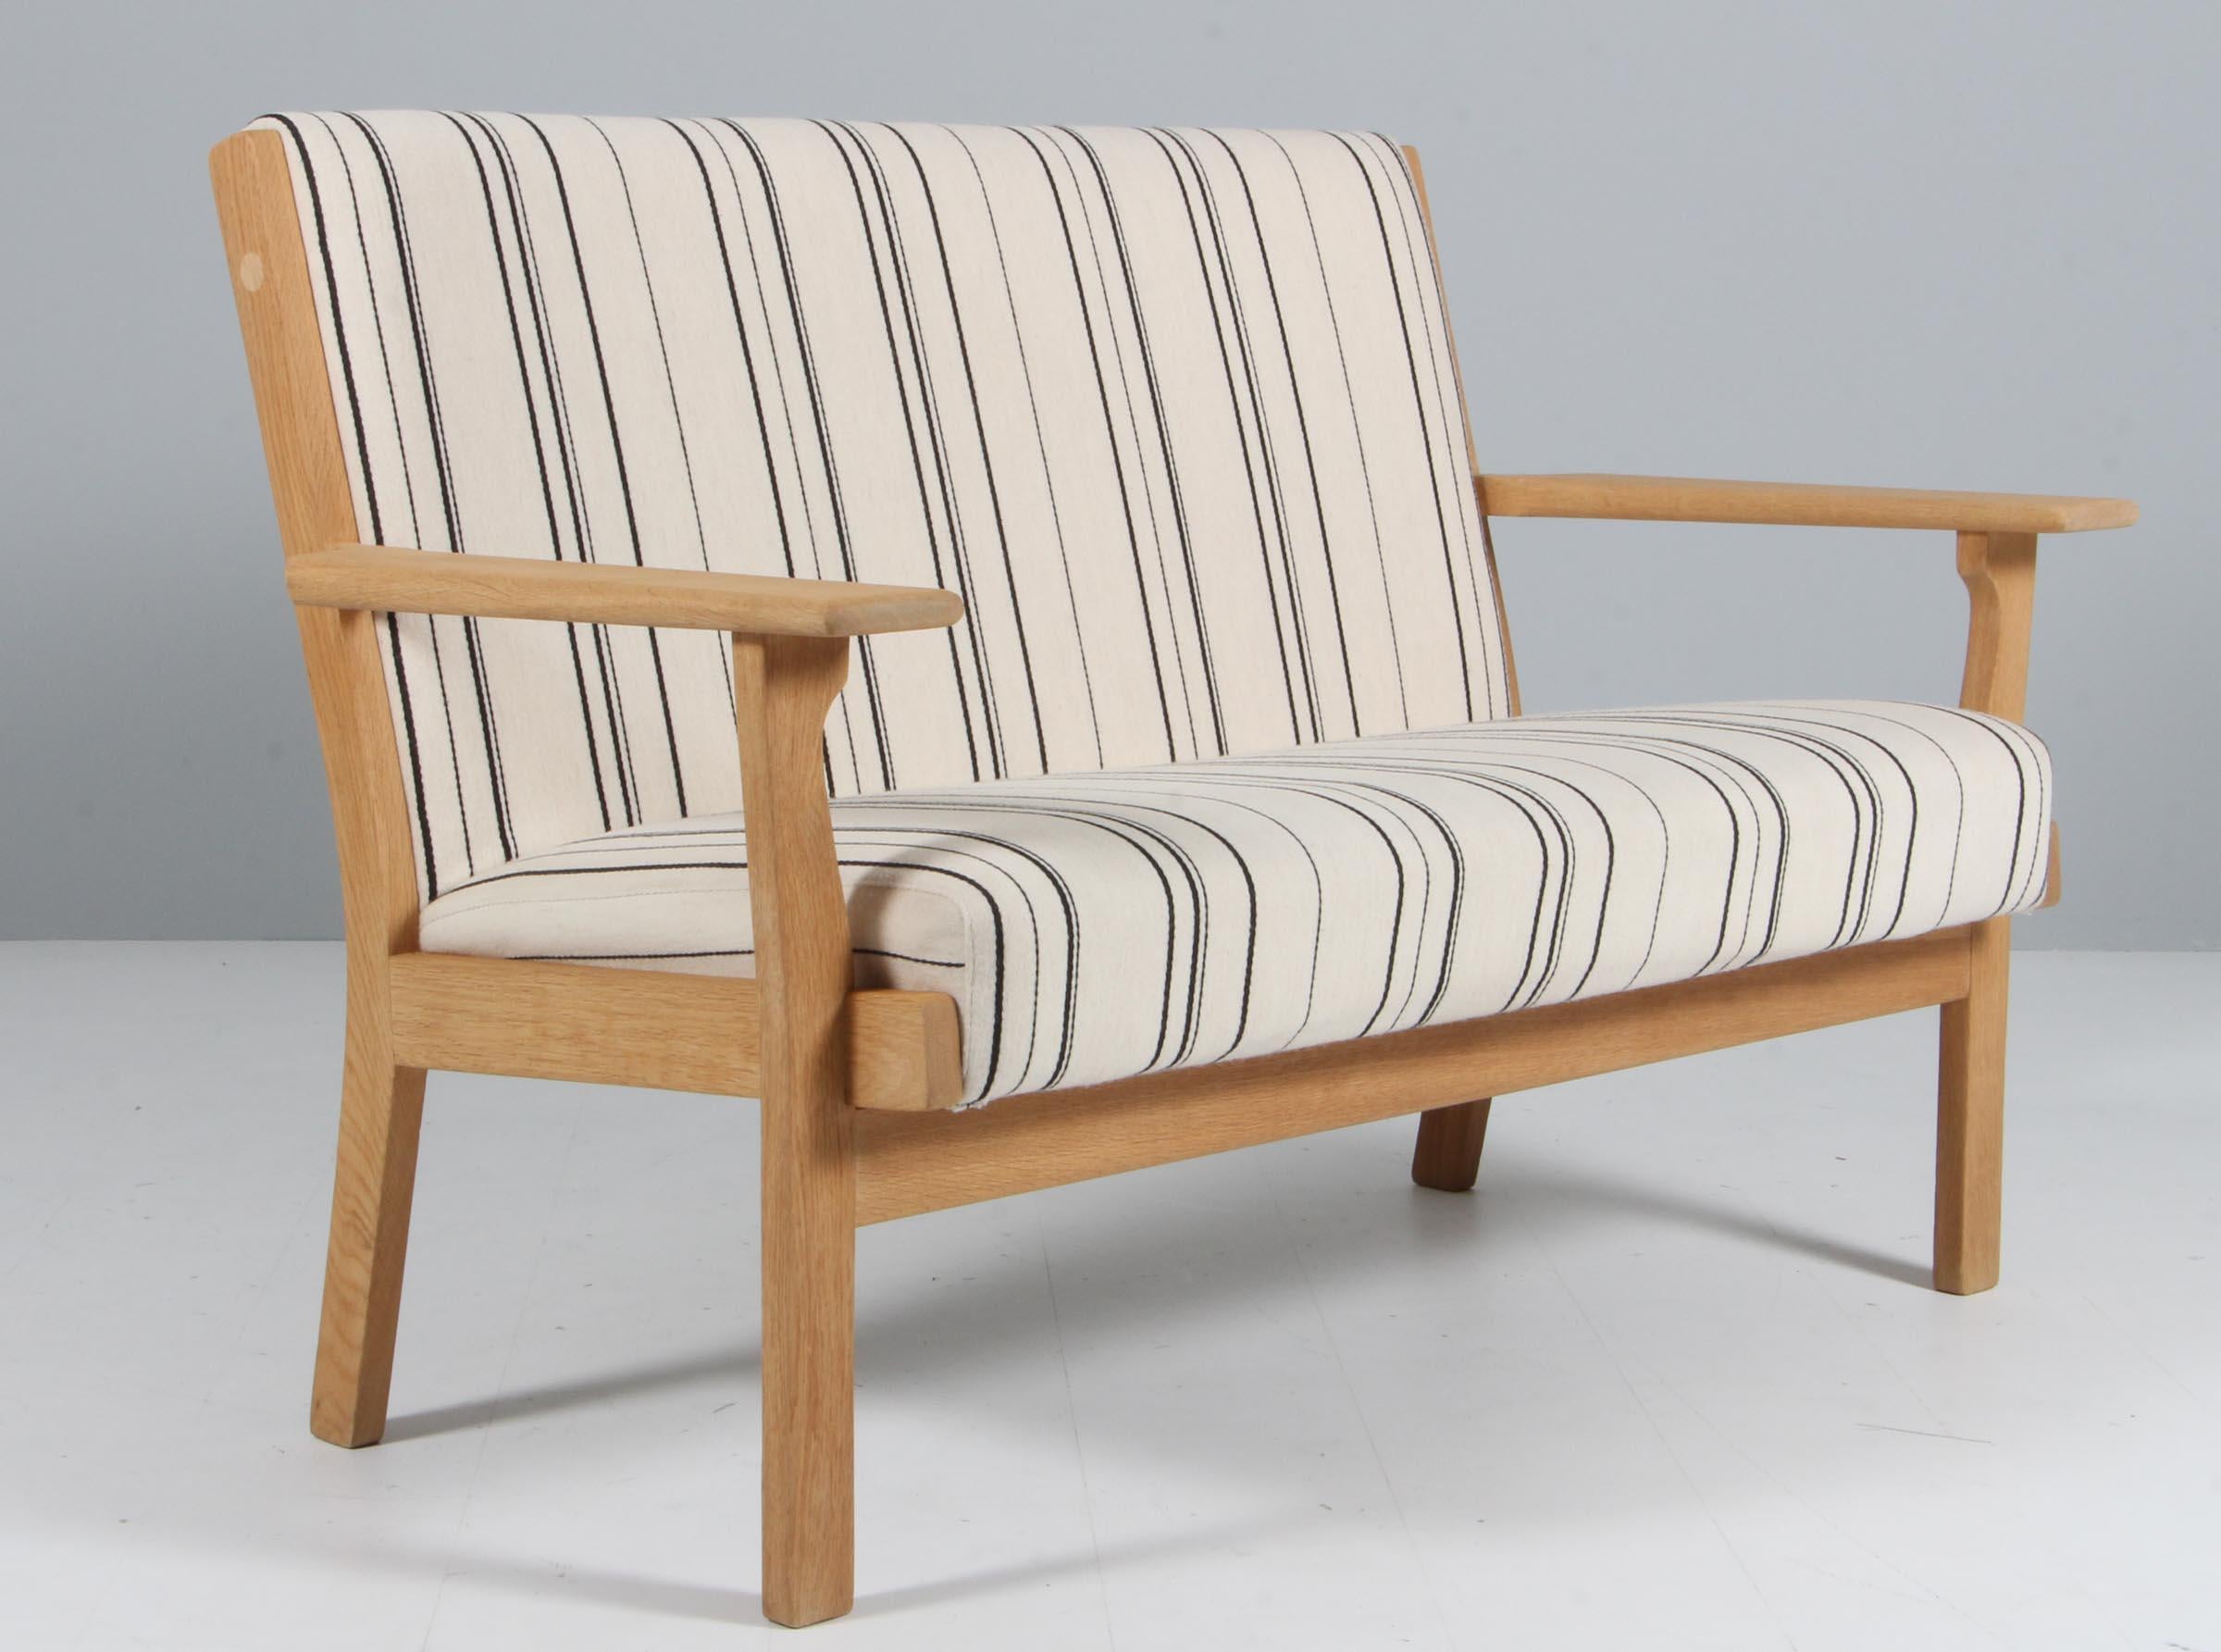 Hans J. Wegner two seat sofa with frame of soap treated oak.

Upholstered with stribed Savak fabric from Gabriel.

Made by getama.